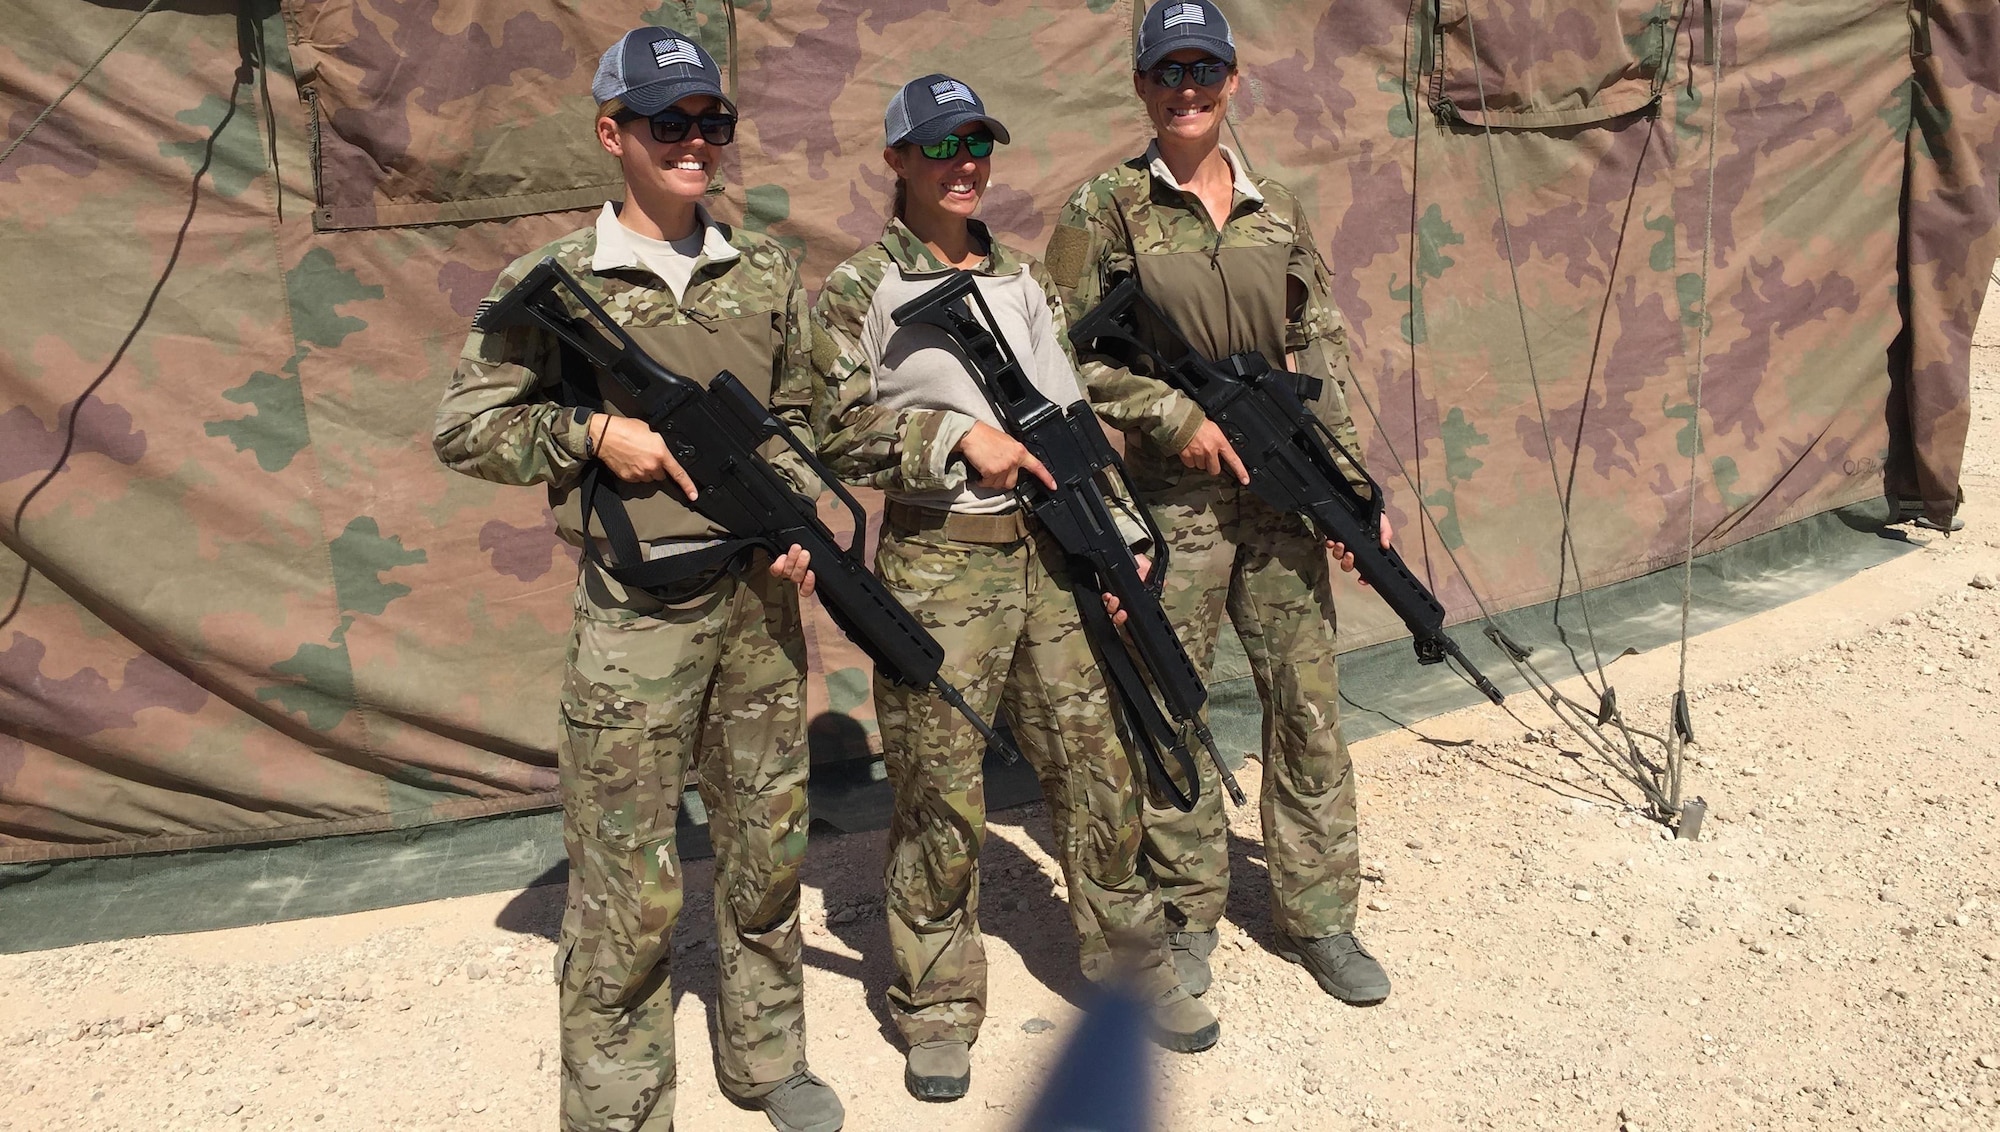 USA Team 2, Capt. Amy Moore, Maj. Caitlin Harris and Maj. Jamie Turner, proudly display their G-36 Assault Rifles prior to entering the scoring tent to sign their targets.  Jamie finished 40th of 78 competitors.